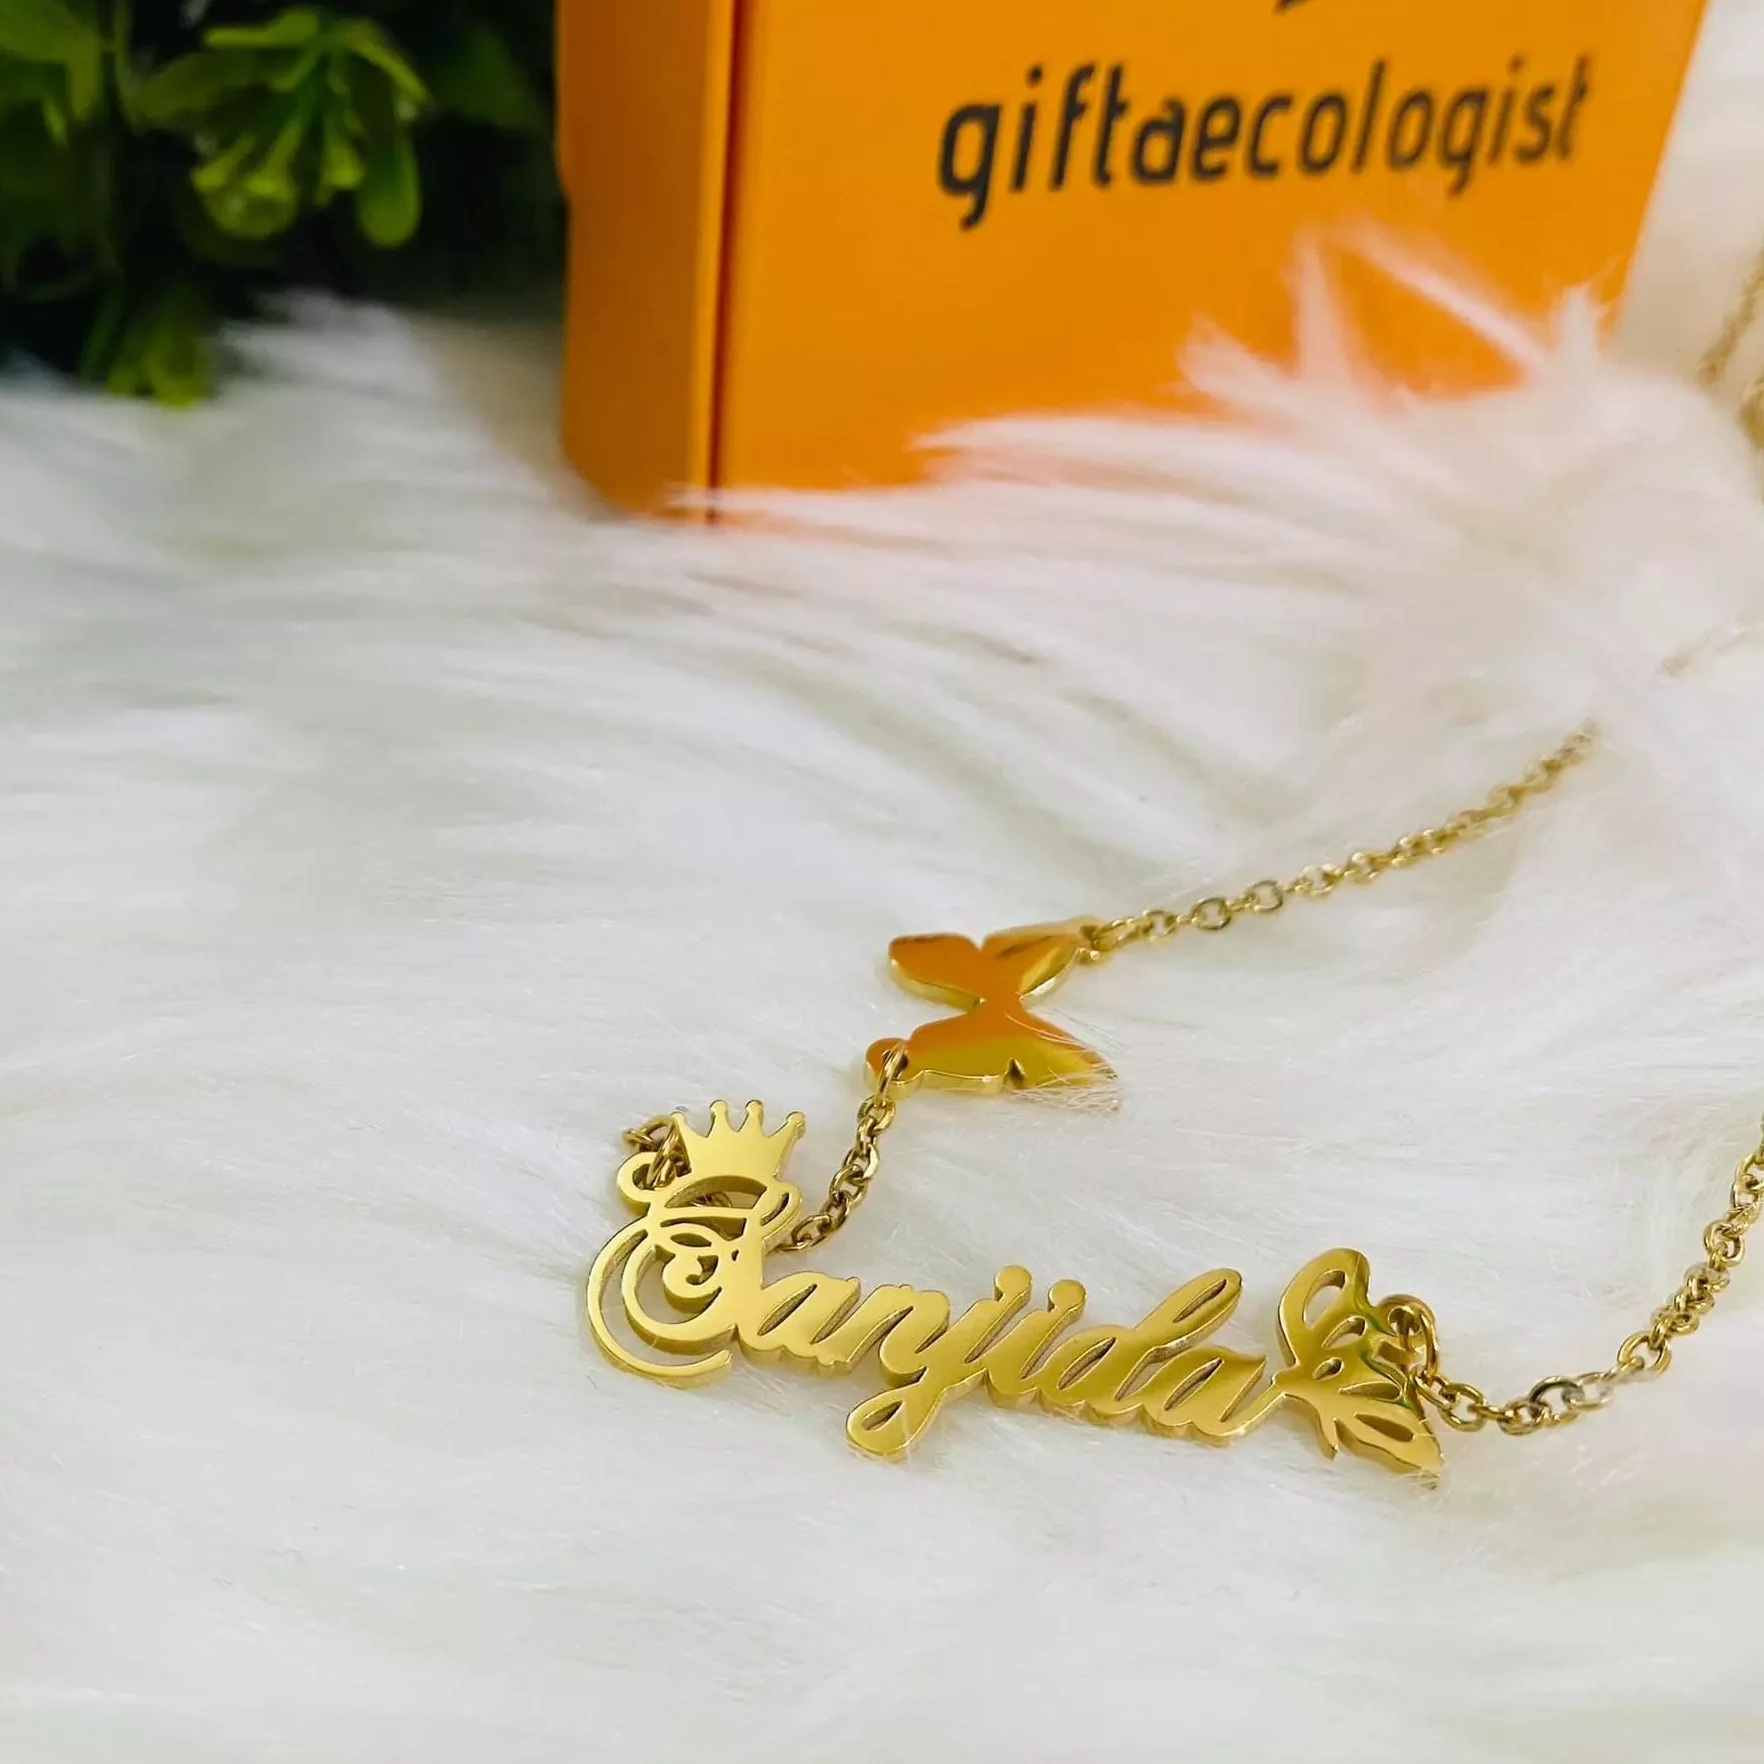 Chain Butterfly F9 Crown Butterfly Name Necklace Giftaecologist